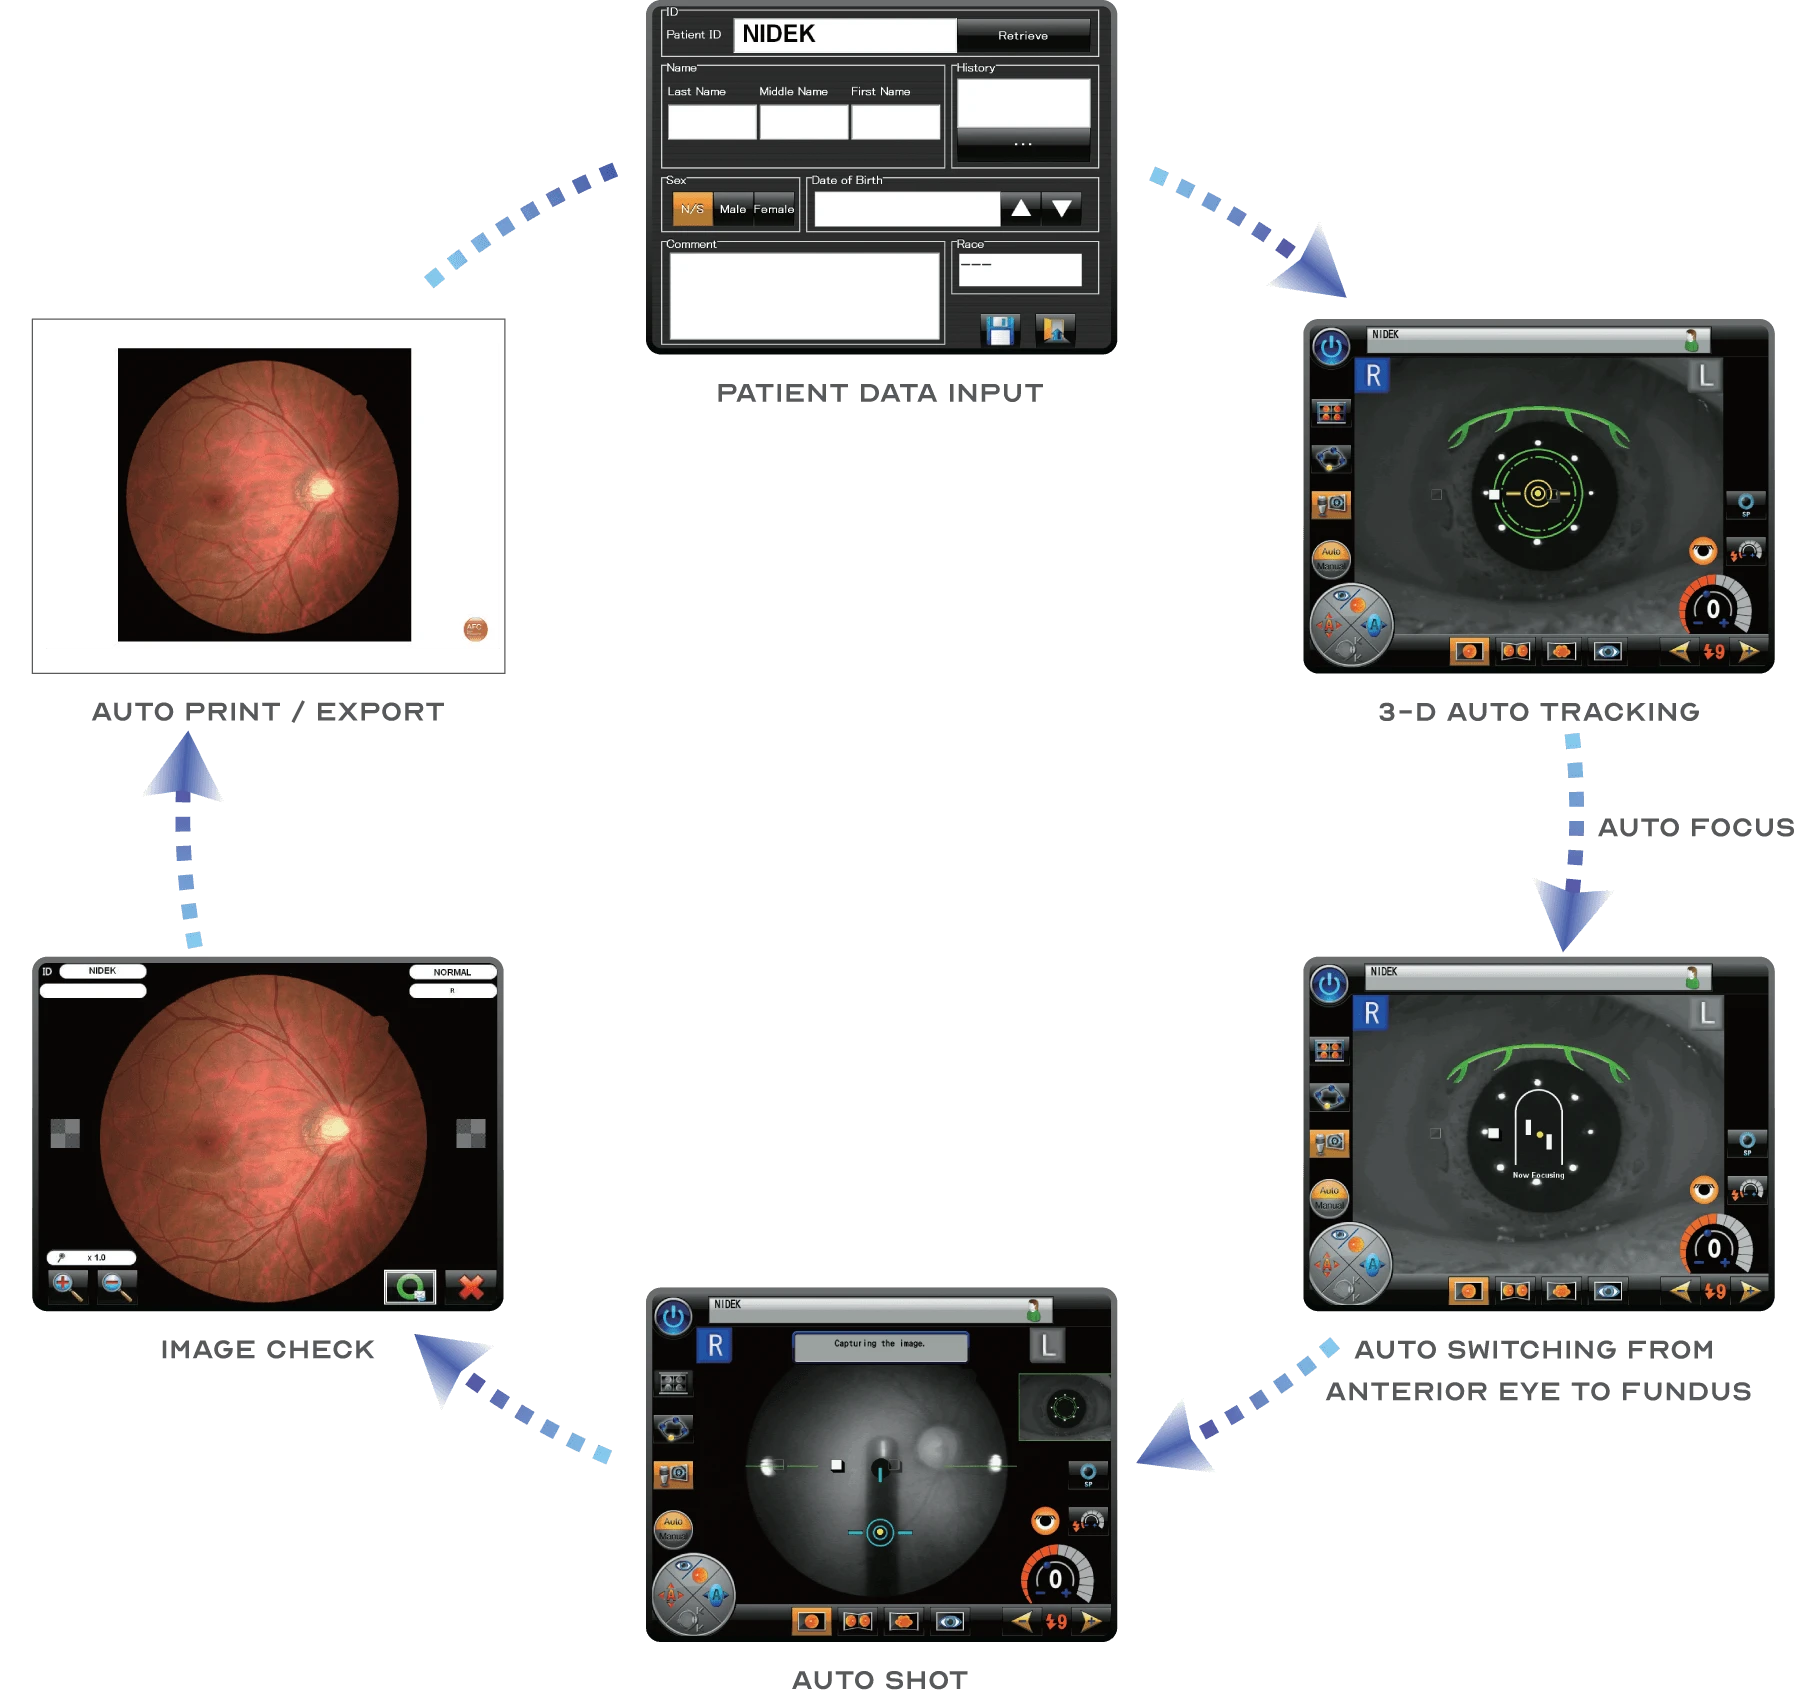 Diagram Showcasing The Workflow Of Using A Nidek Ophthalmologic Device. The Process Includes: Opening A Patient Profile, Capturing And Processing Retinal Images, Aligning The Eye, Analyzing Measurements, And Displaying Results On A Computer Interface.